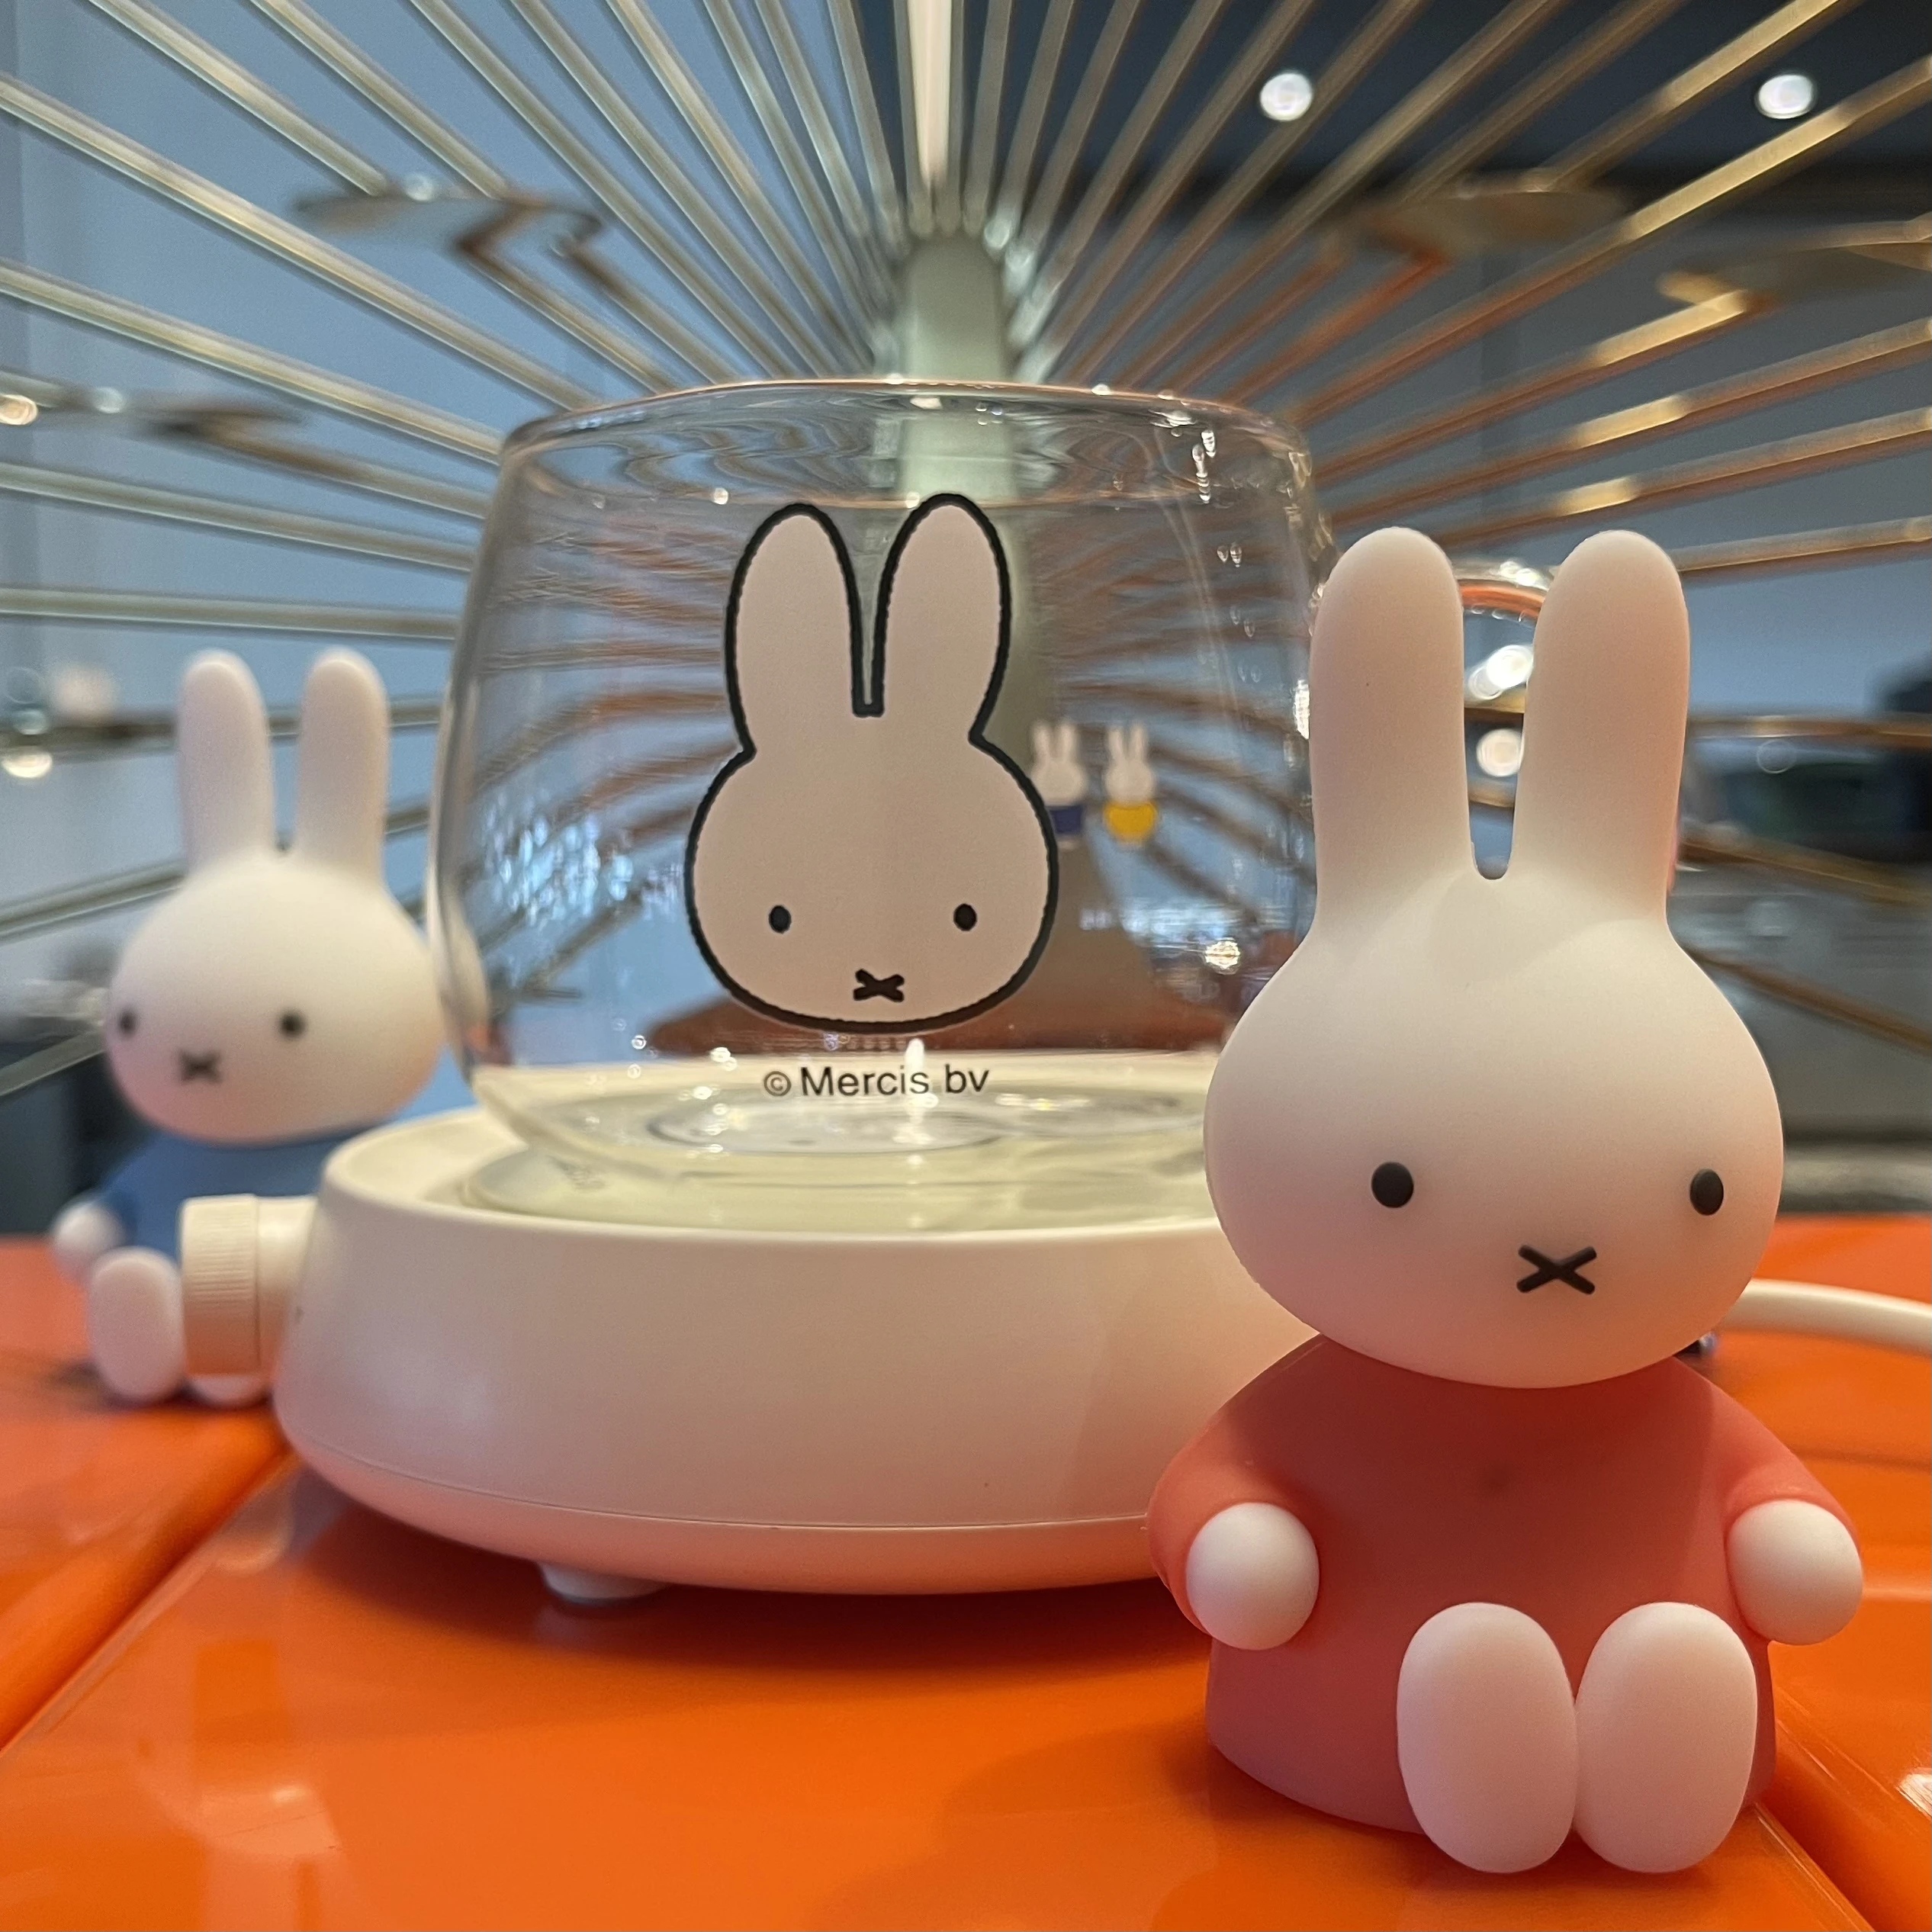 https://ae01.alicdn.com/kf/S421d028042374e5583b84760ebfe4f868/Miffy-x-MIPOW-Coffee-Mug-Warmer-For-Office-Home-with-3-Temperature-Settings-Auto-Off-Cup.jpg